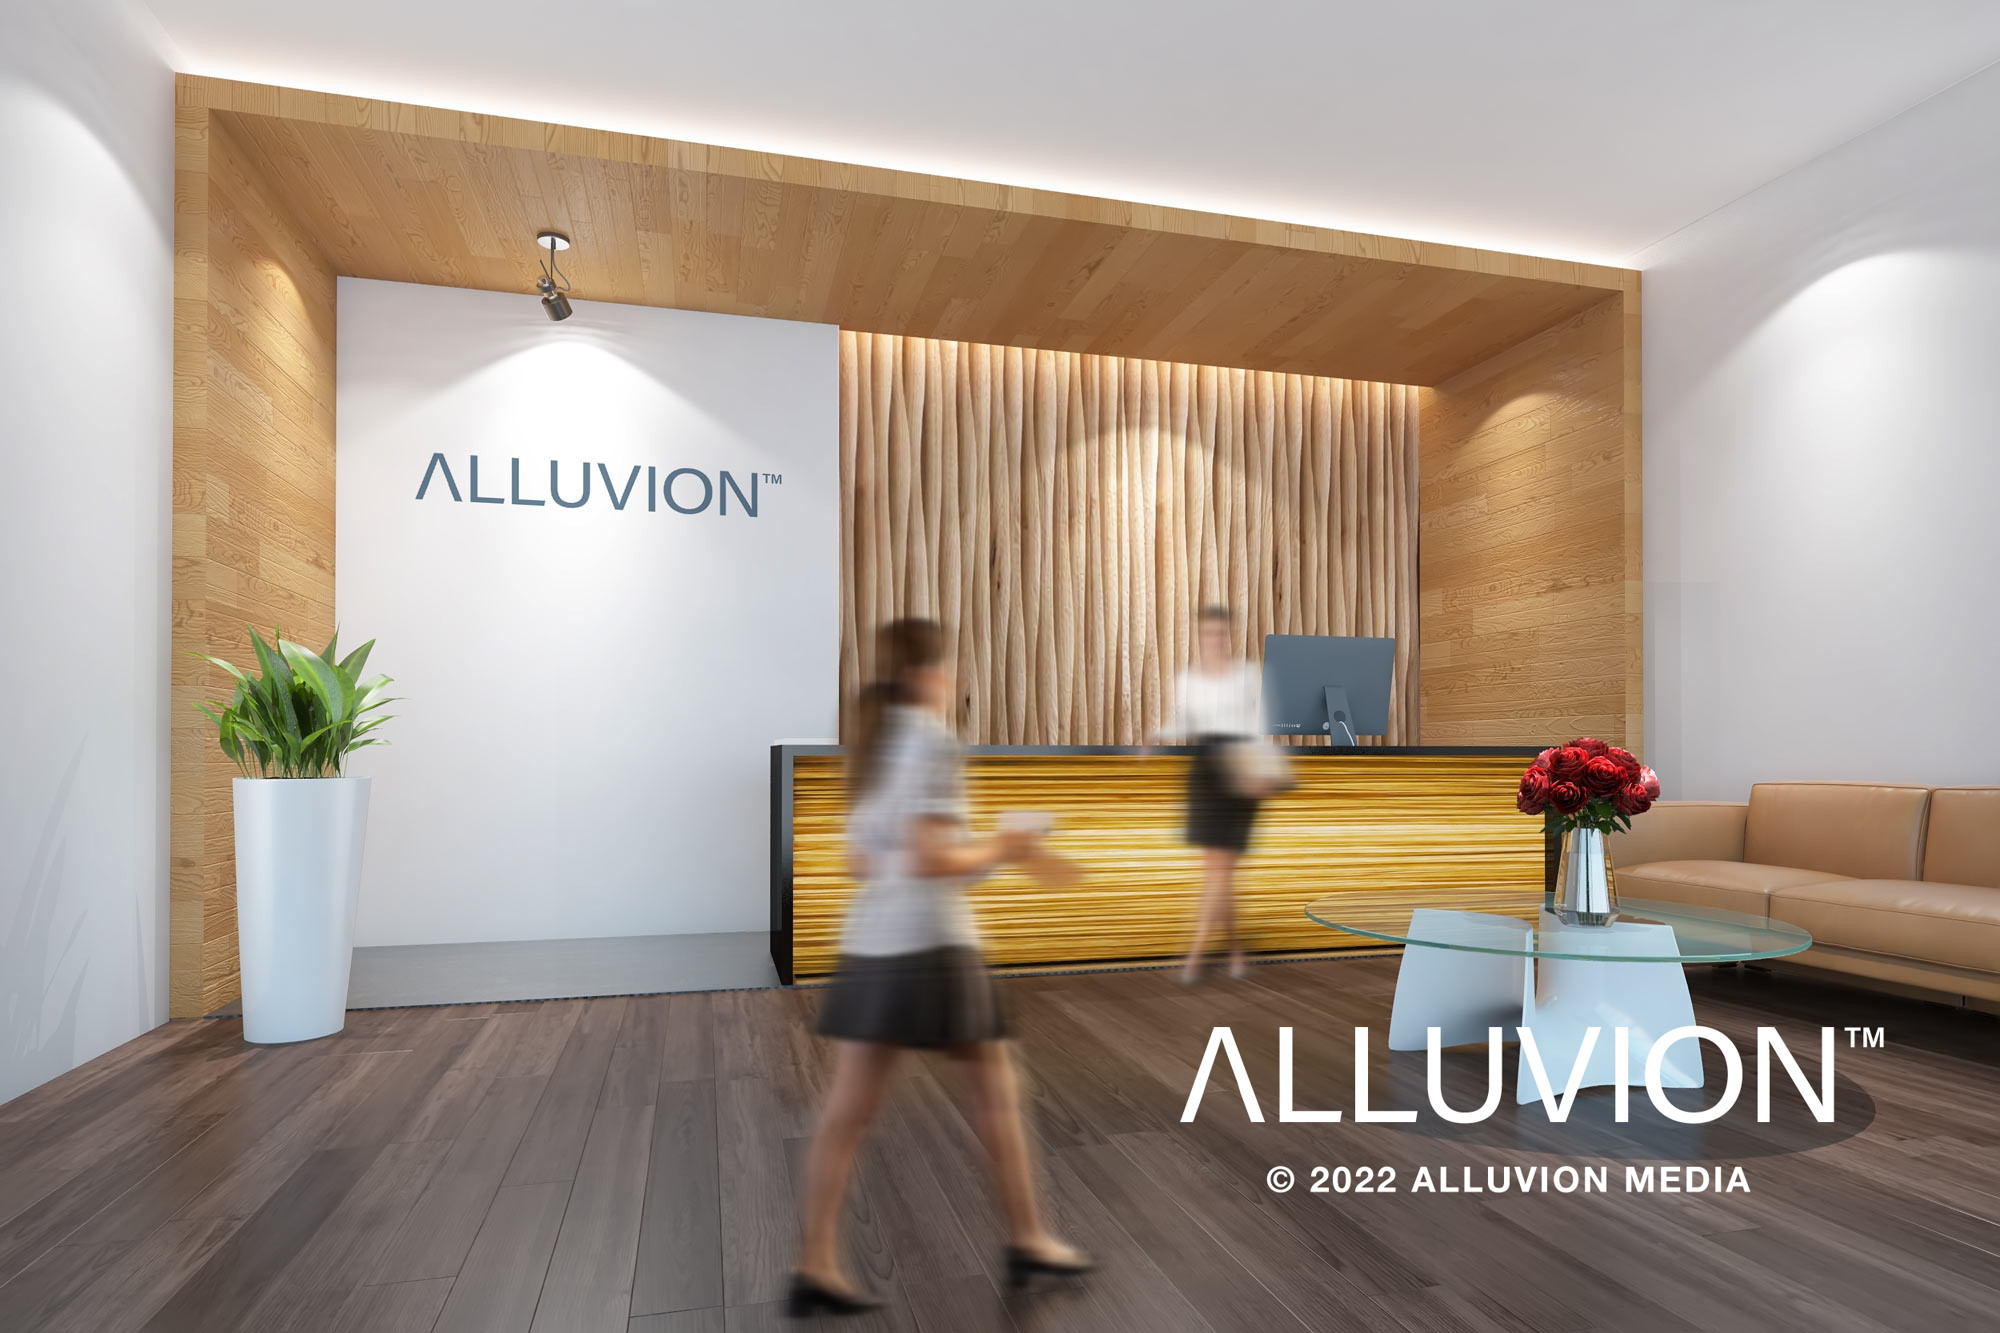 Duncan Avenue Studios is now part of the Alluvion Media